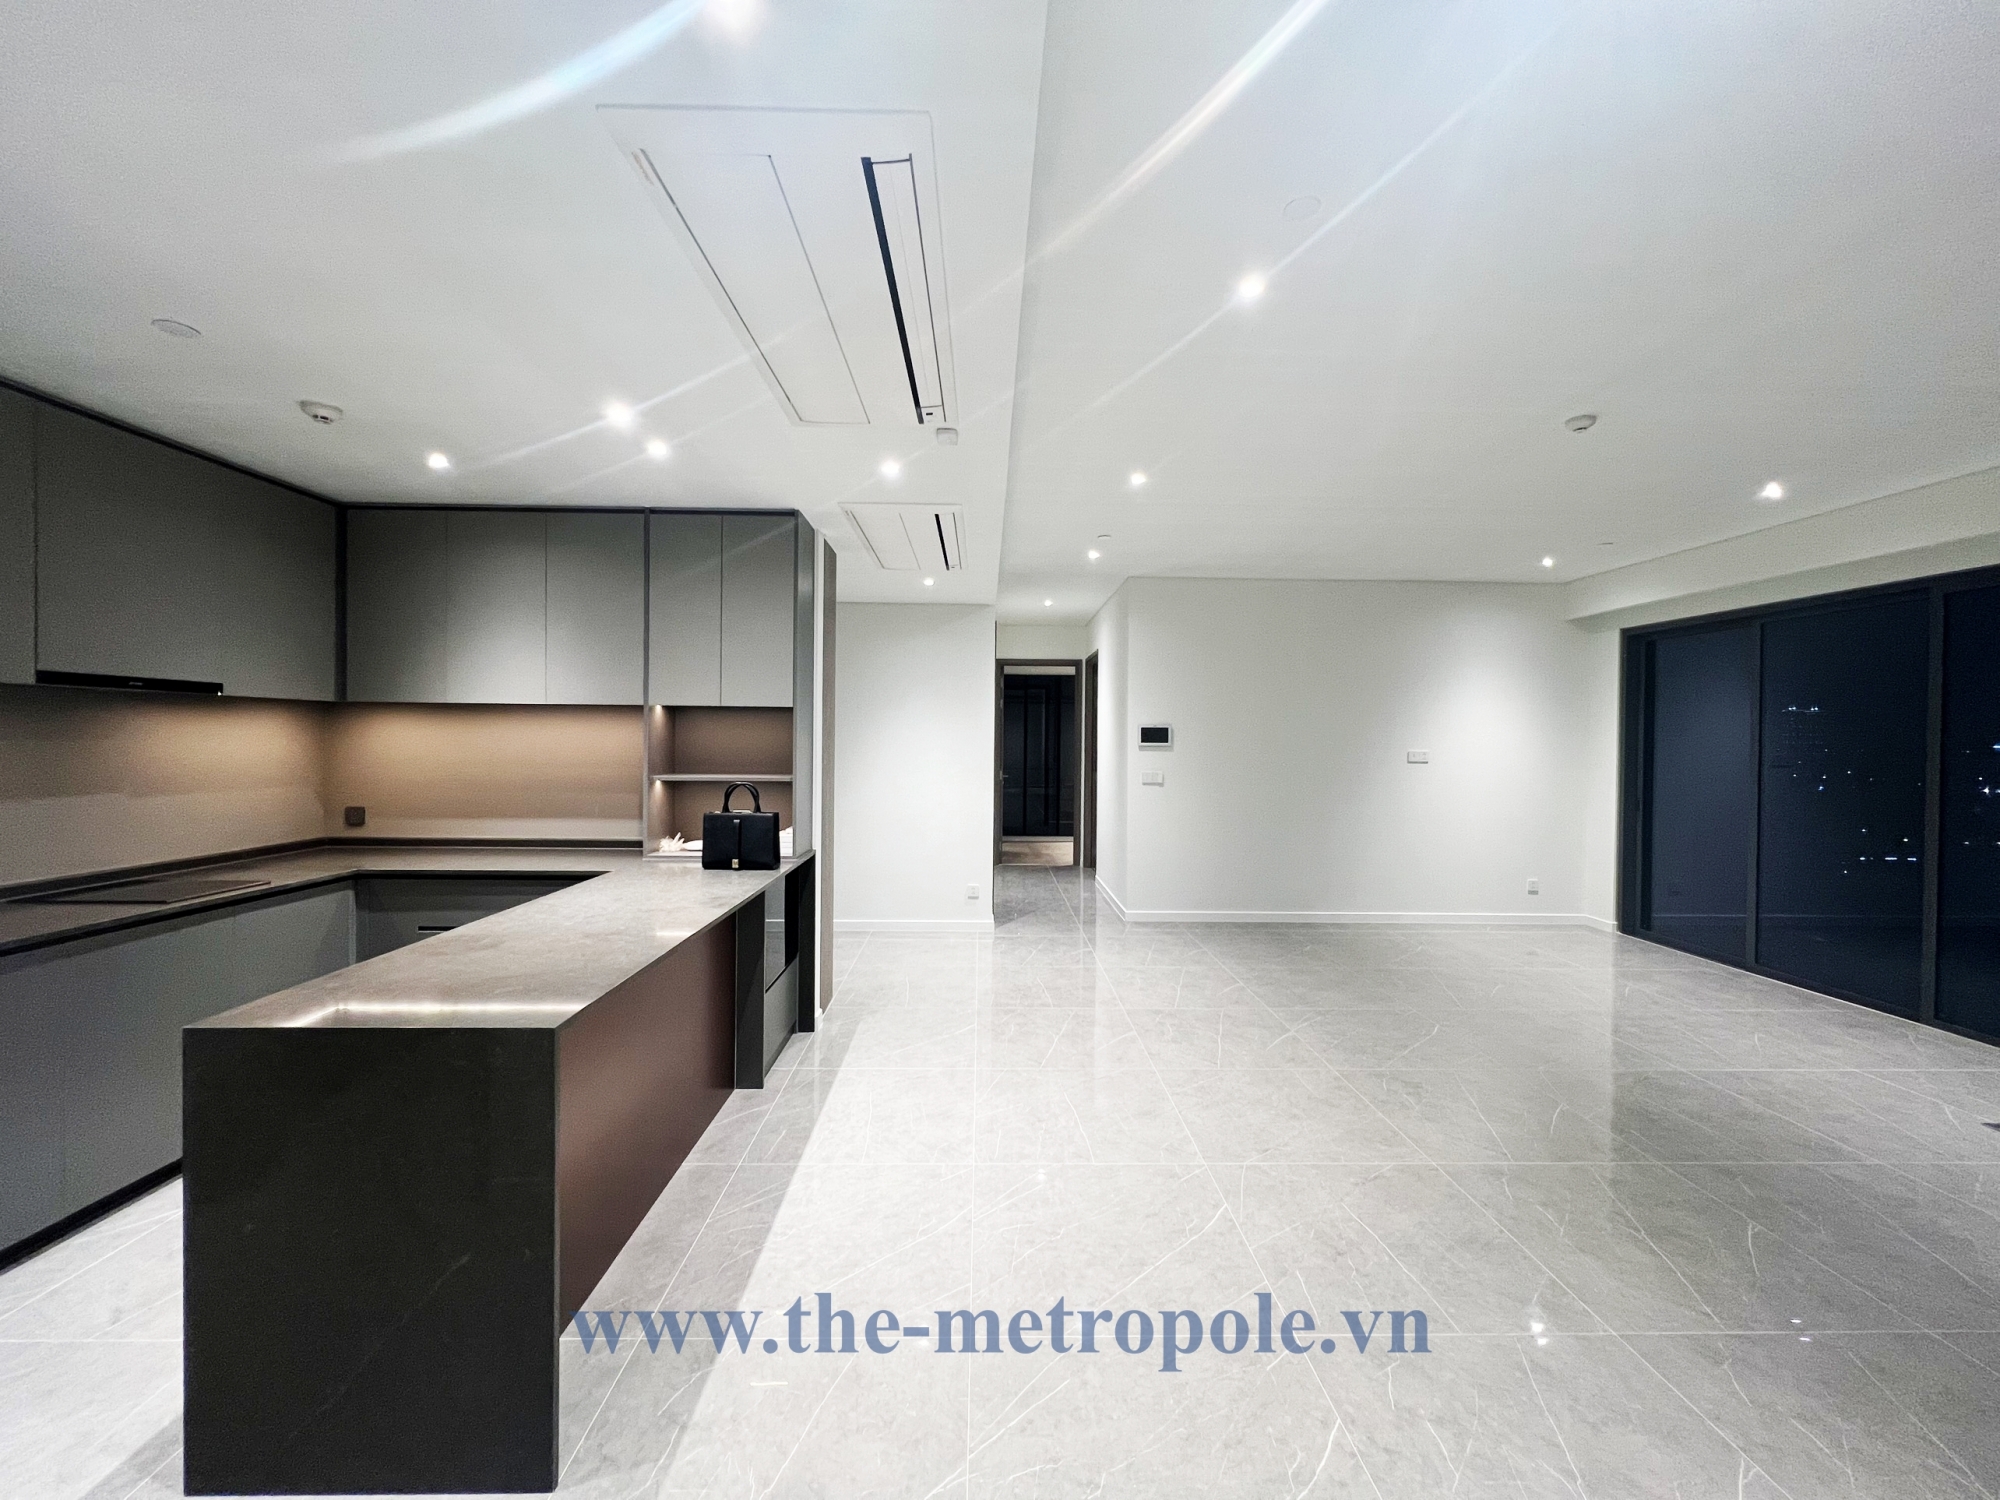 Big size 4-bedroom apartment for rent in The Opera Residence - 181m2 - 2830 USD/month